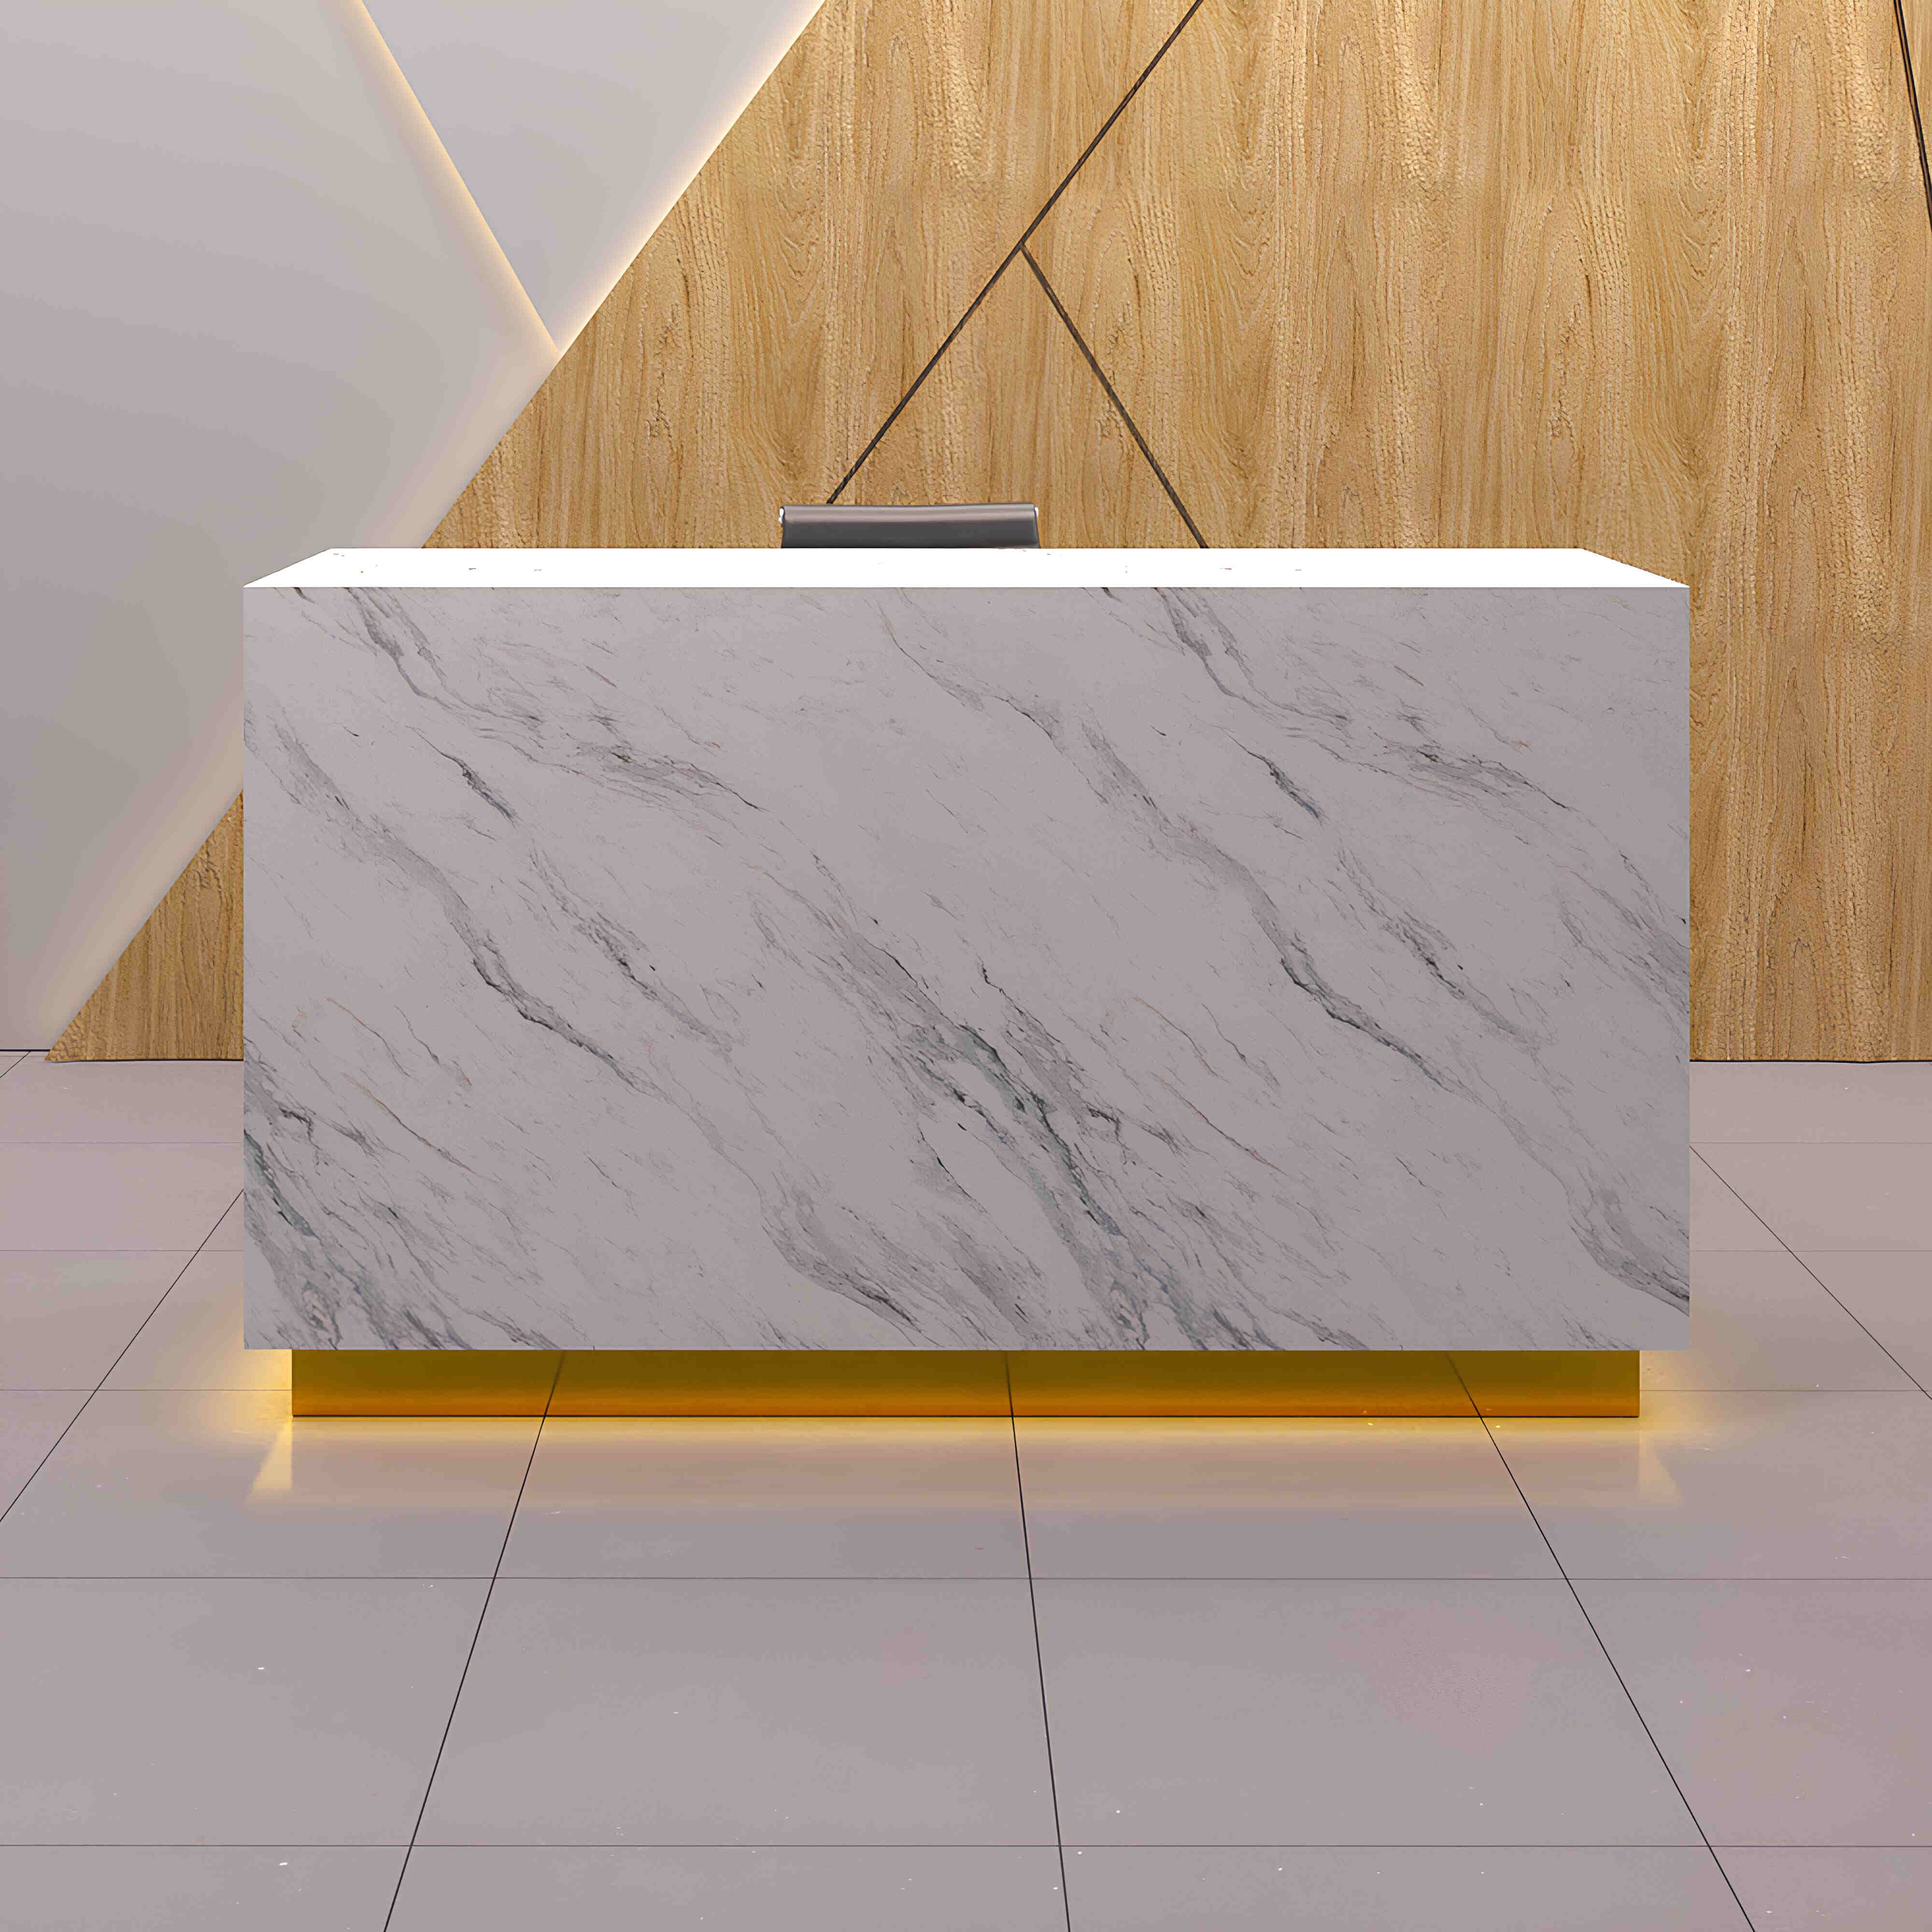 72-inch Houston Custom Reception Desk in calcutta stone pvc main desk and brushed gold toe-kick, with color LED, shown here.